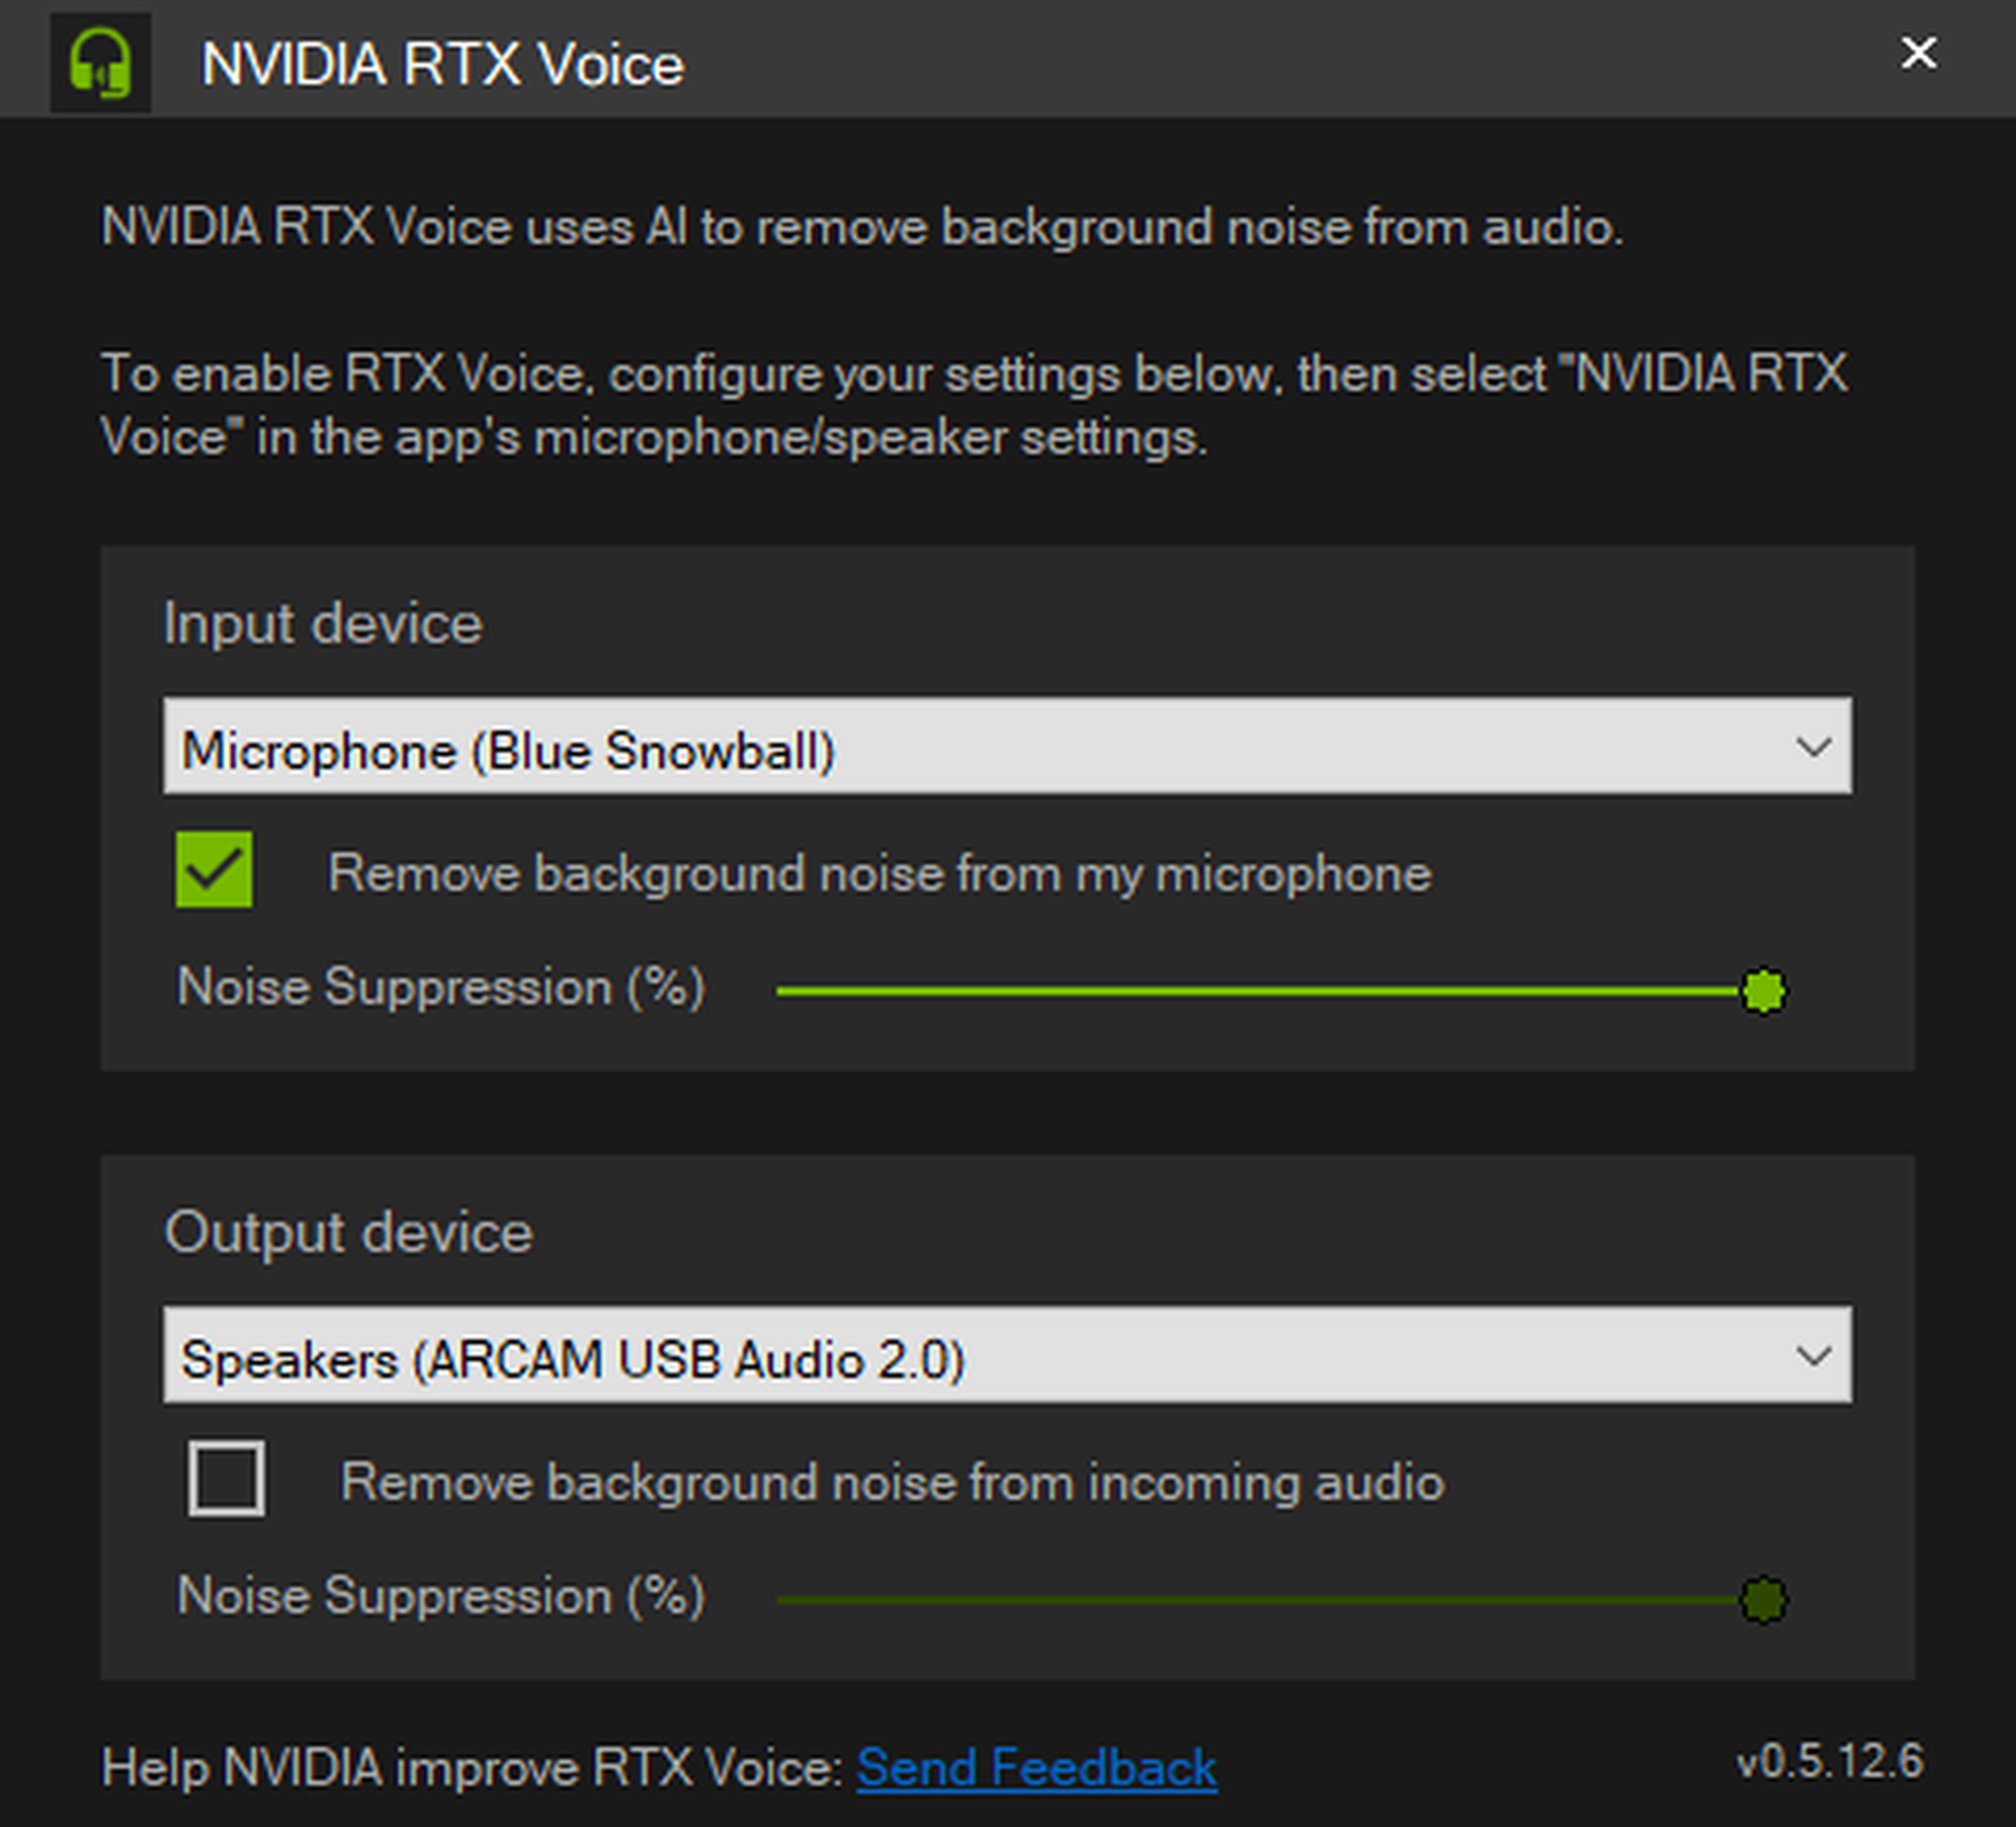 You can set RTX Voice to work on your microphone input and / or your speaker’s output.